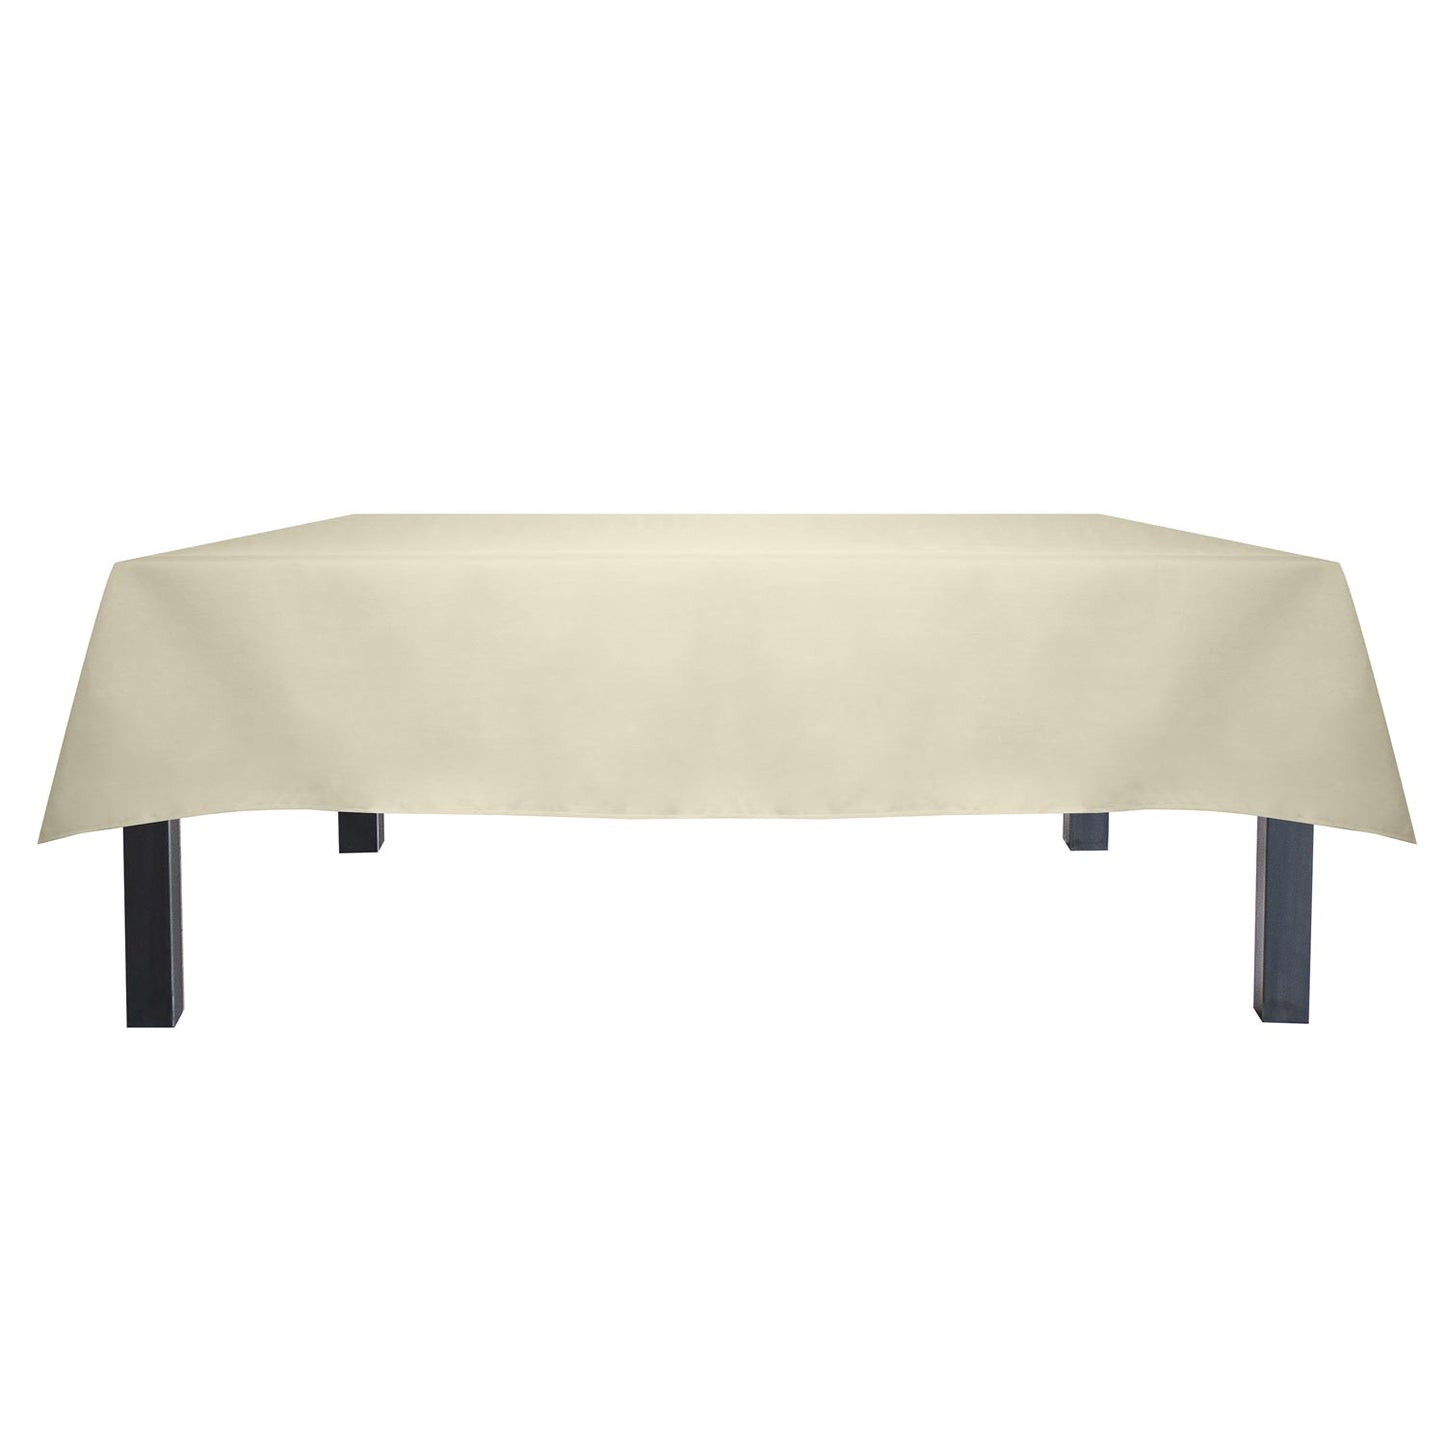 Milliken Signature  Table Cloth, 52 x 114 inch, Rectangle